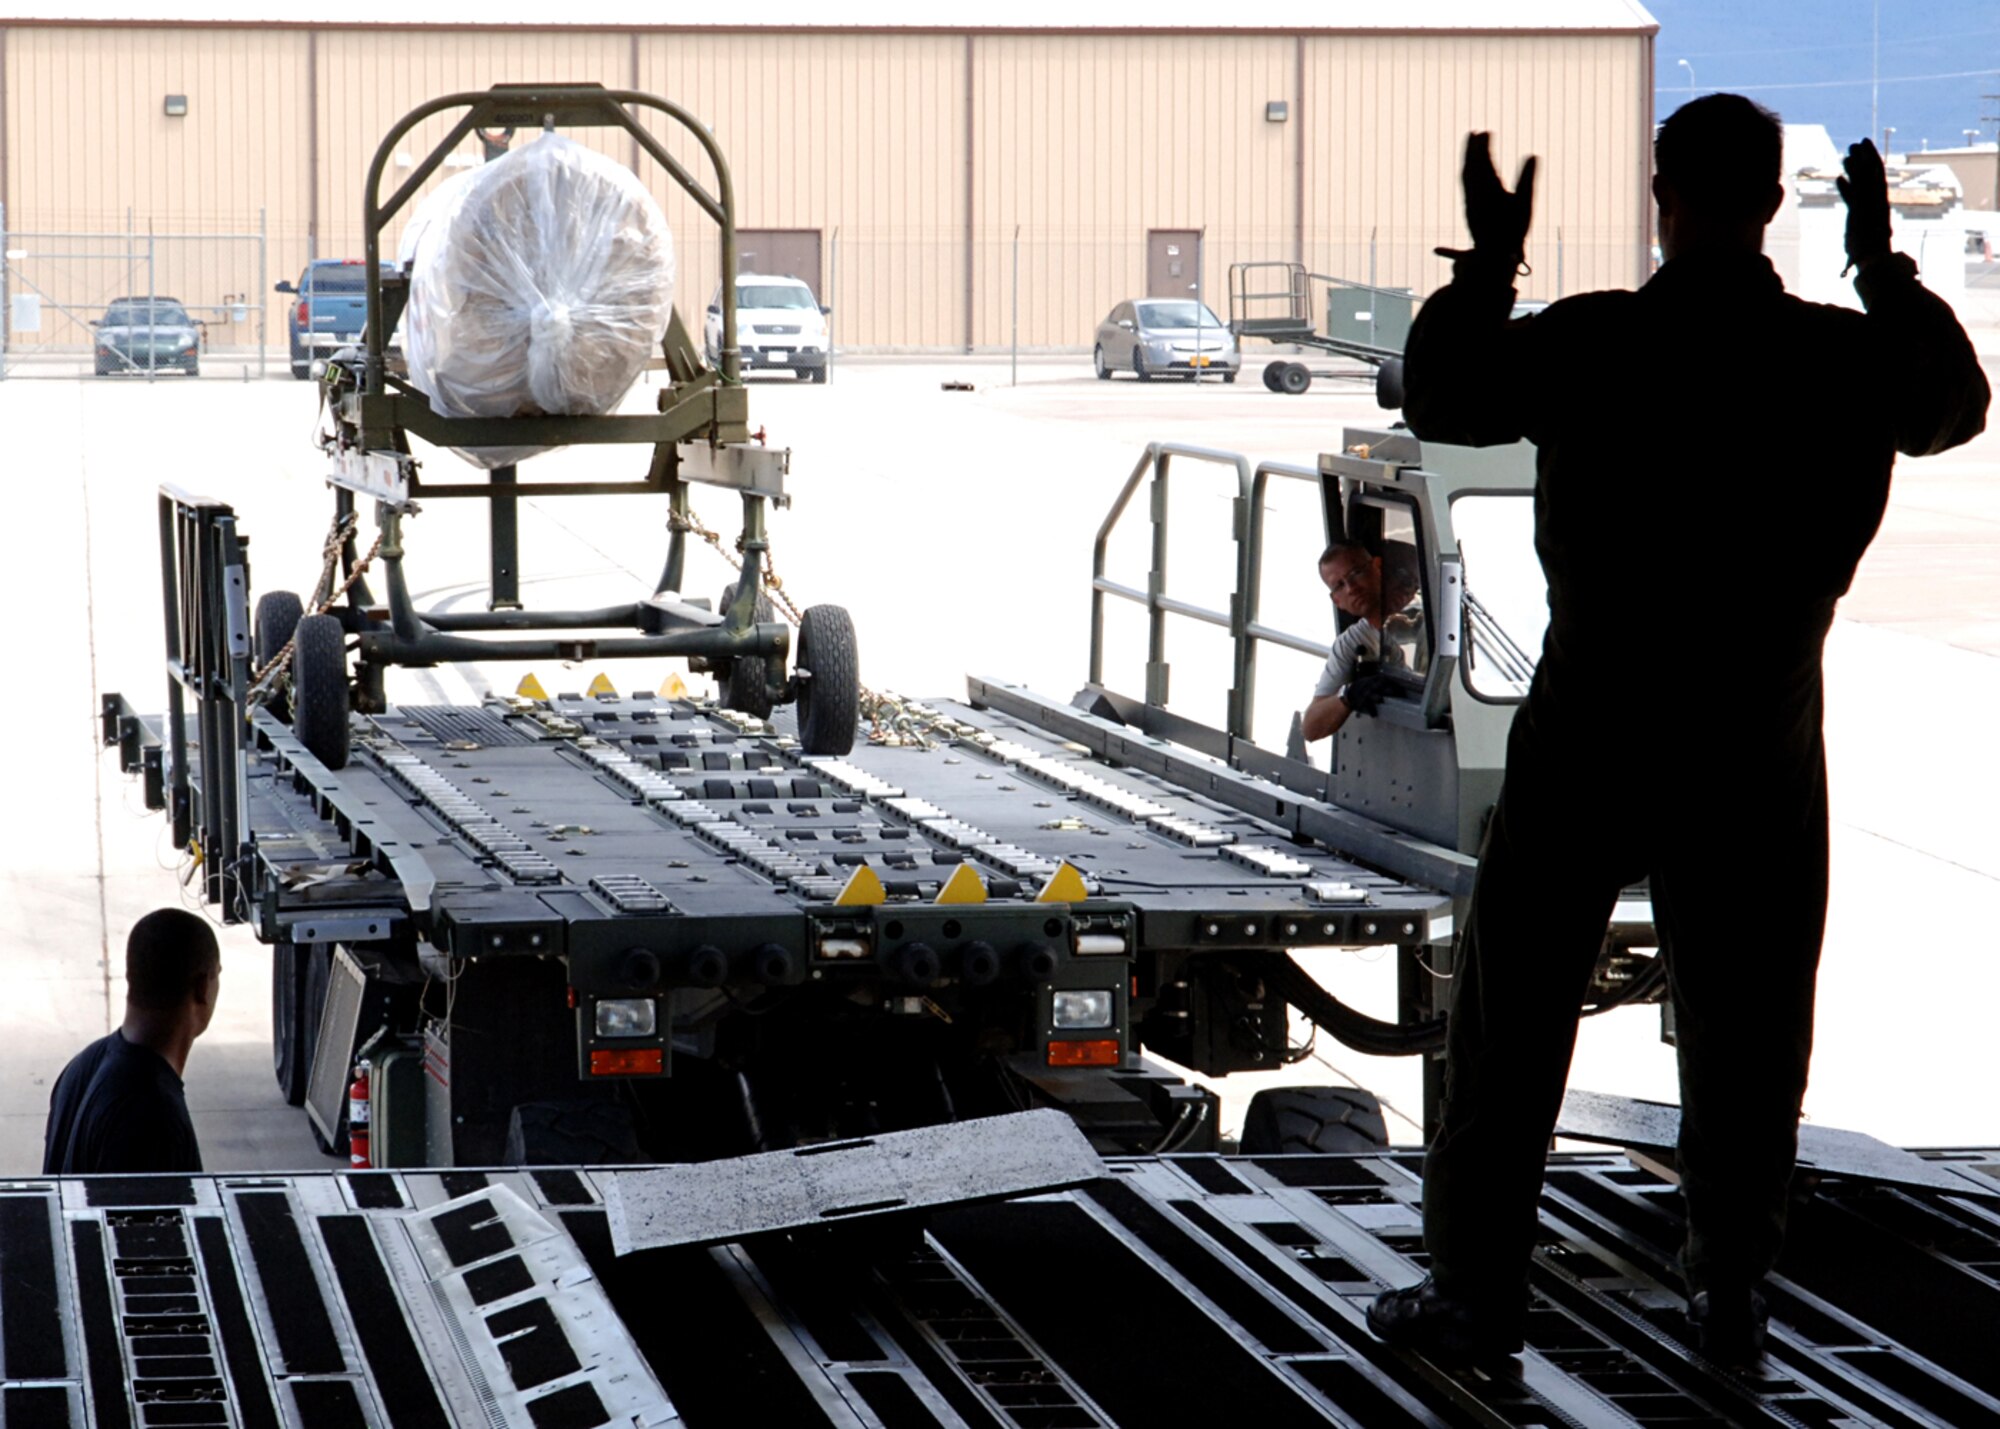 Tech Sgt. Geoffrey Parish, 729th Airlift Squadron, navigates the last pieces of the F-117A on to a C-17, at Holloman Air Force Base, N.M.  The C-17 used to transport the remaining pieces of the F-117A was flown from March Air Force Base, C.A.  (U.S. Air Force photo by Airman 1st Class John D. Strong II)